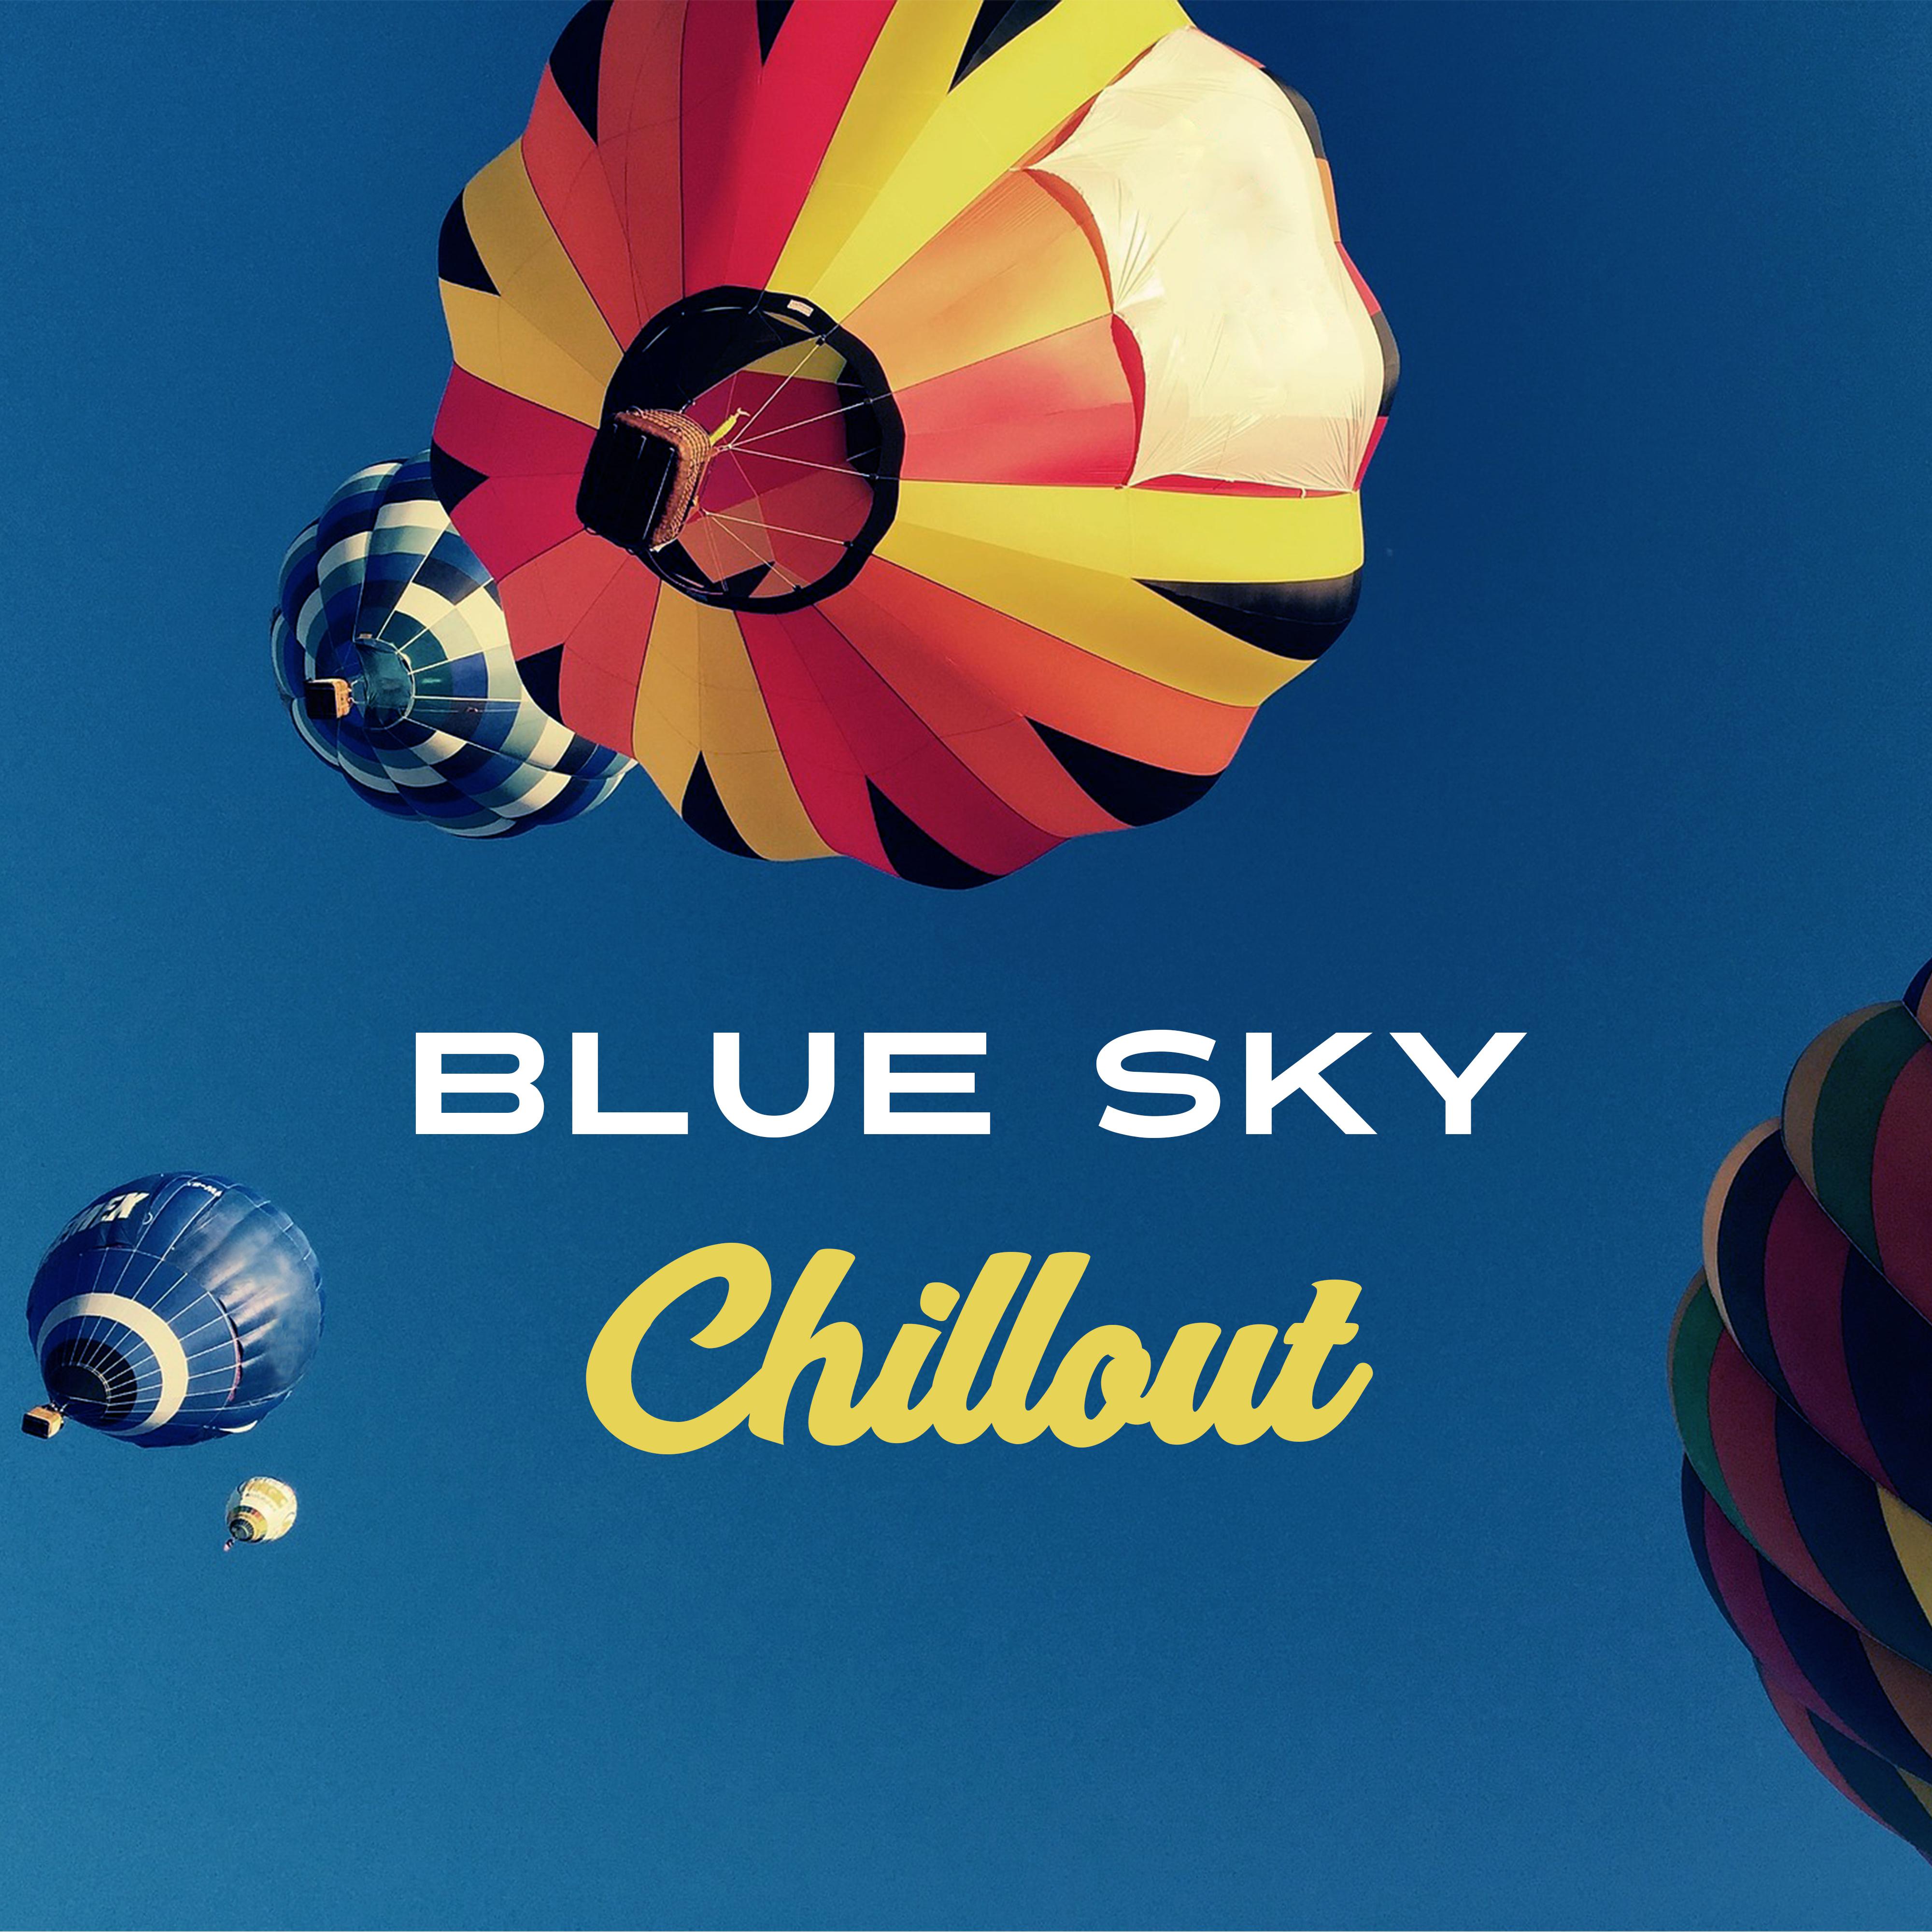 Blue Sky Chillout  Smooth Chilout Vibrations,  Chill, Chil Out Lounge, Ibiza Dreams